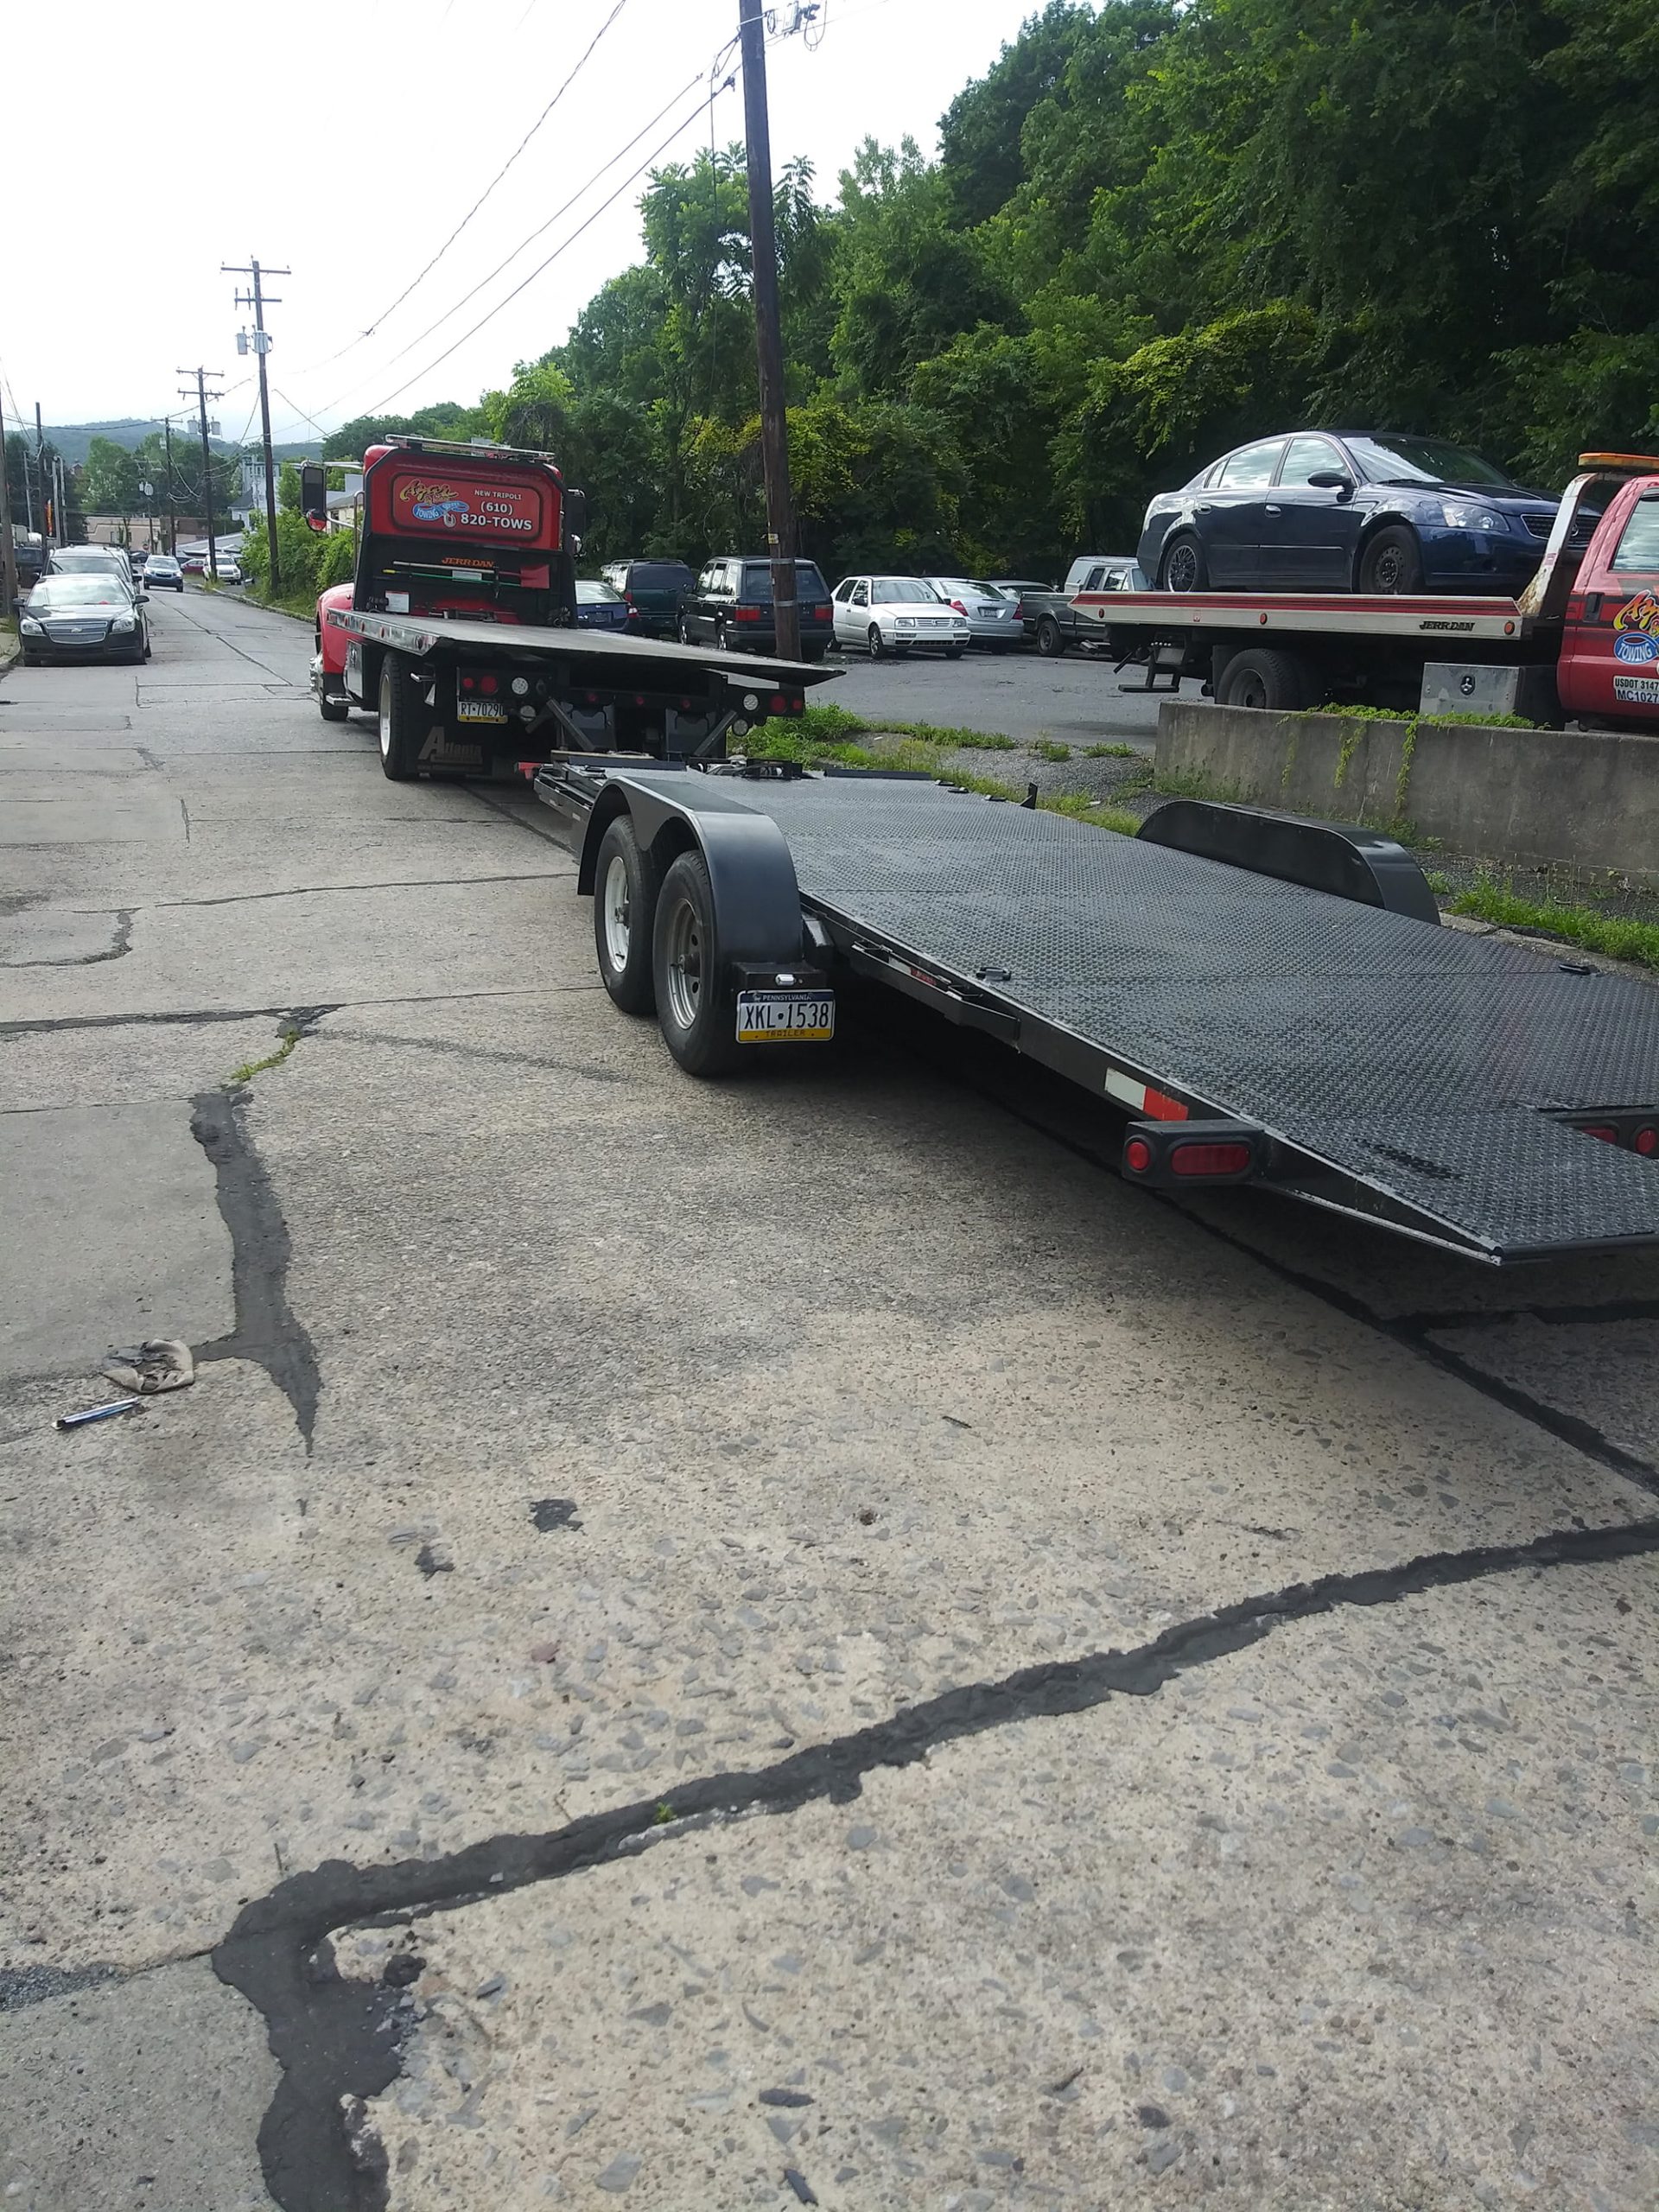 A red flatbed tow truck sits with a second flatbed hooked behind it. Both beds are empty.